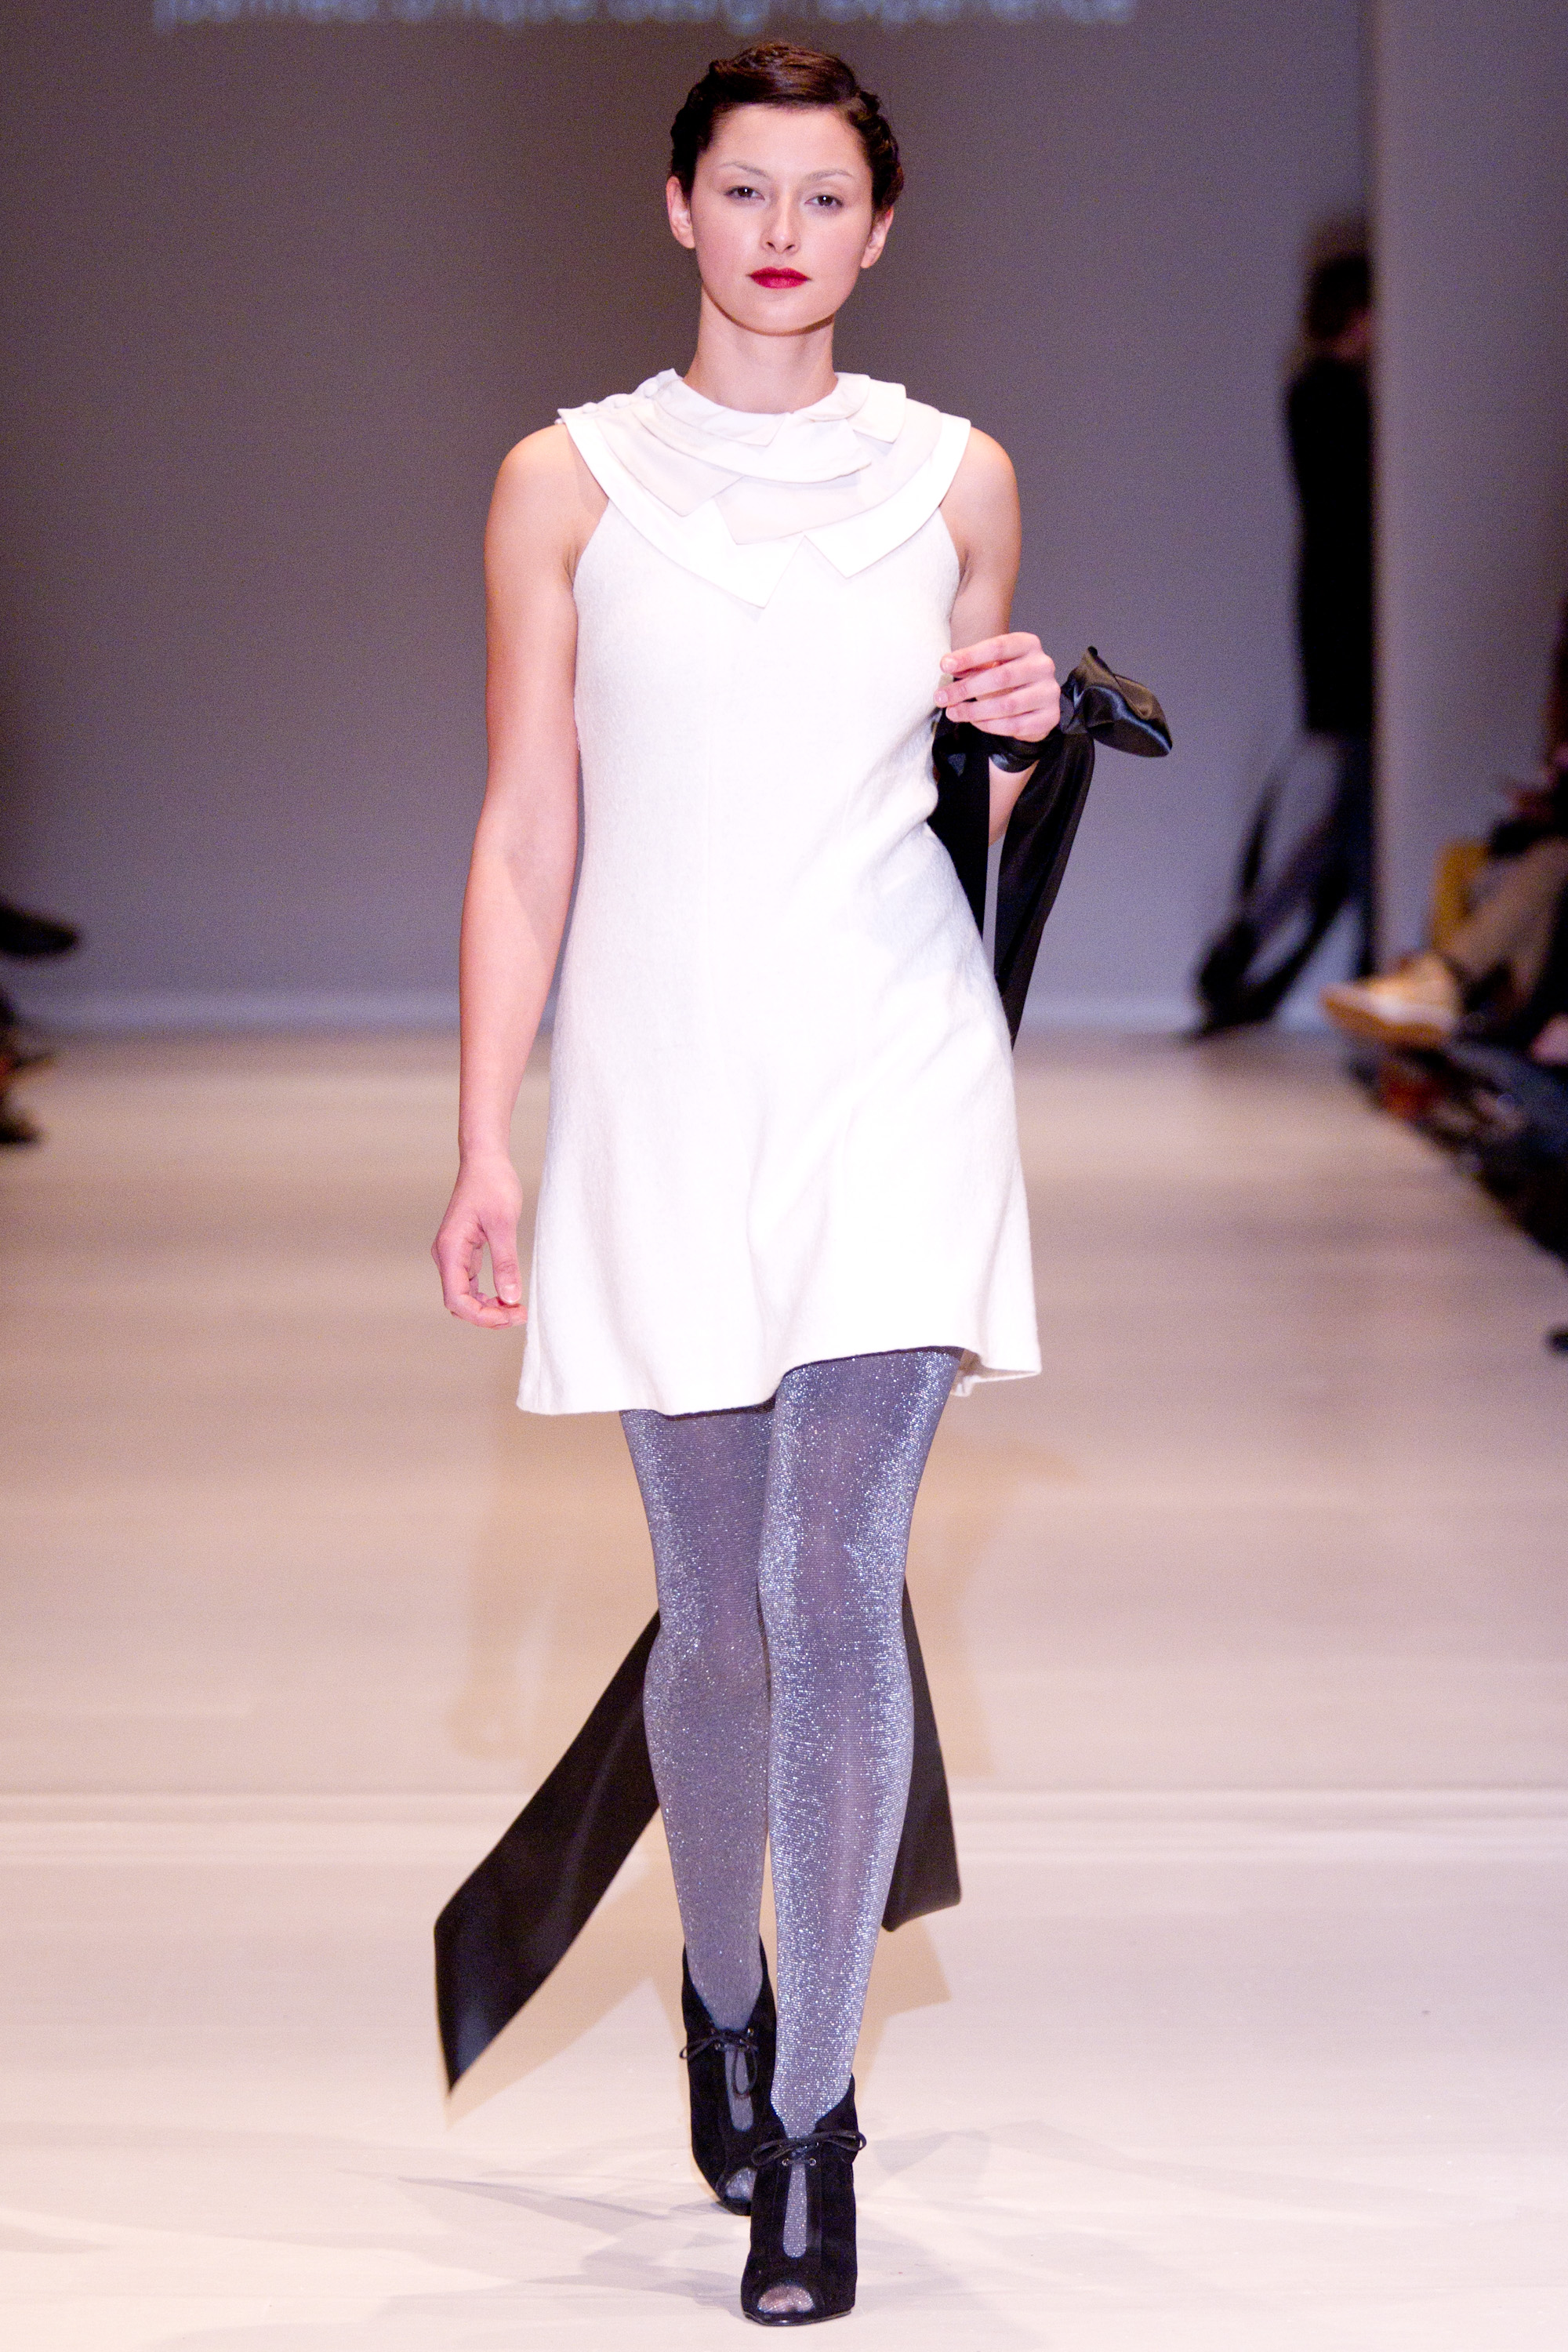 Montreal Fashion Week Day 2: Bodybag by Jude’s Fall/Winter 2011 Collection